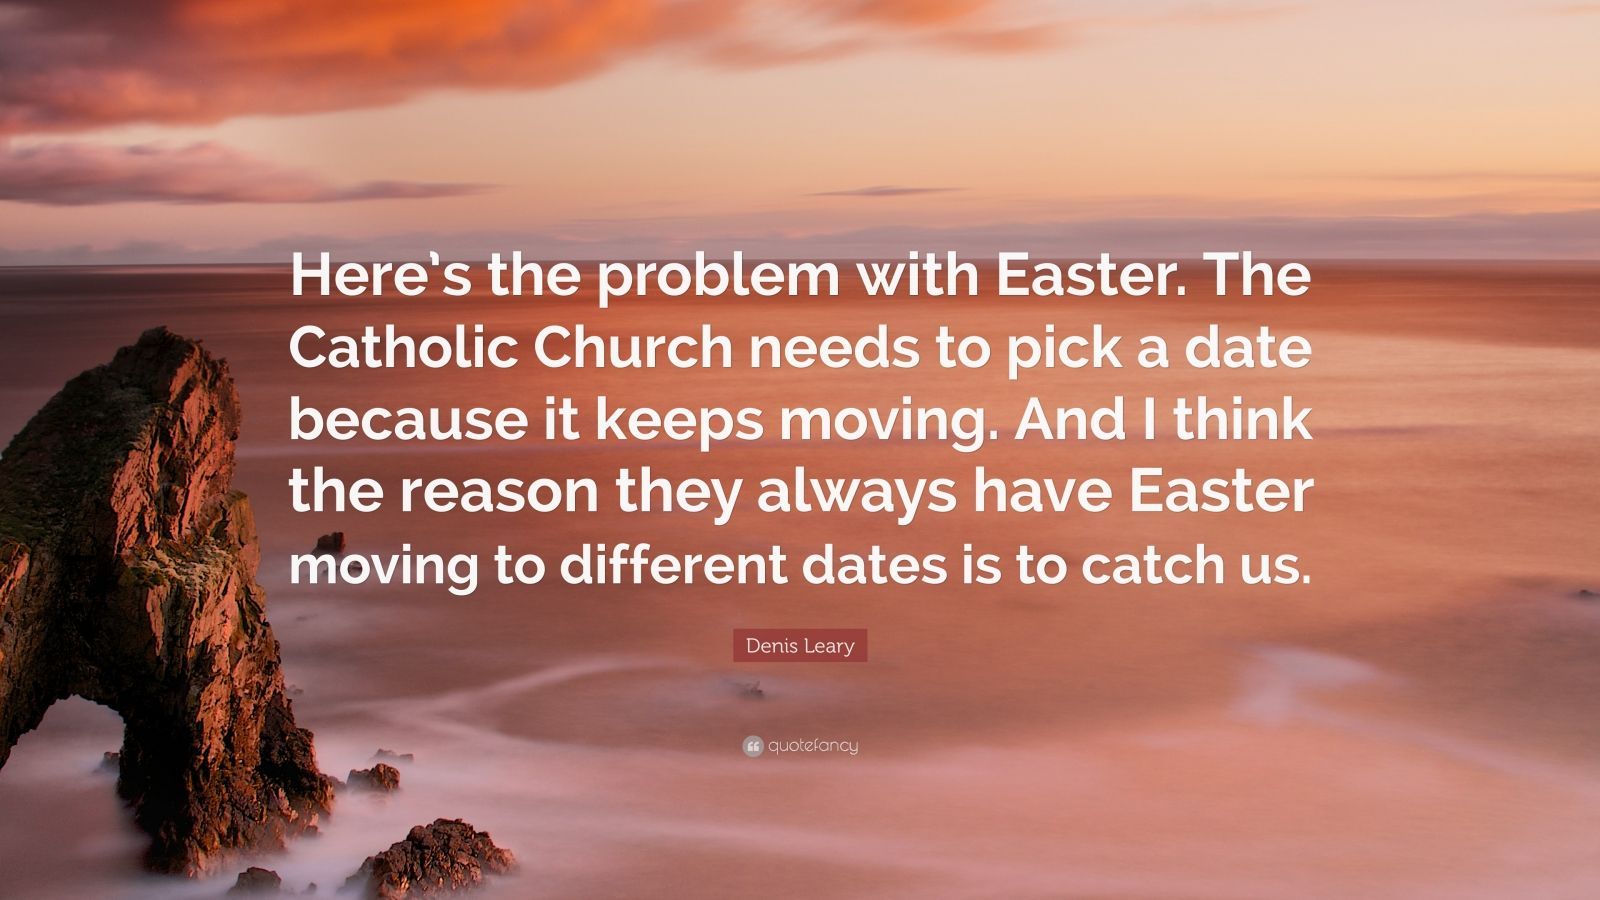 Denis Leary Quote: “Here's the problem with Easter. The Catholic